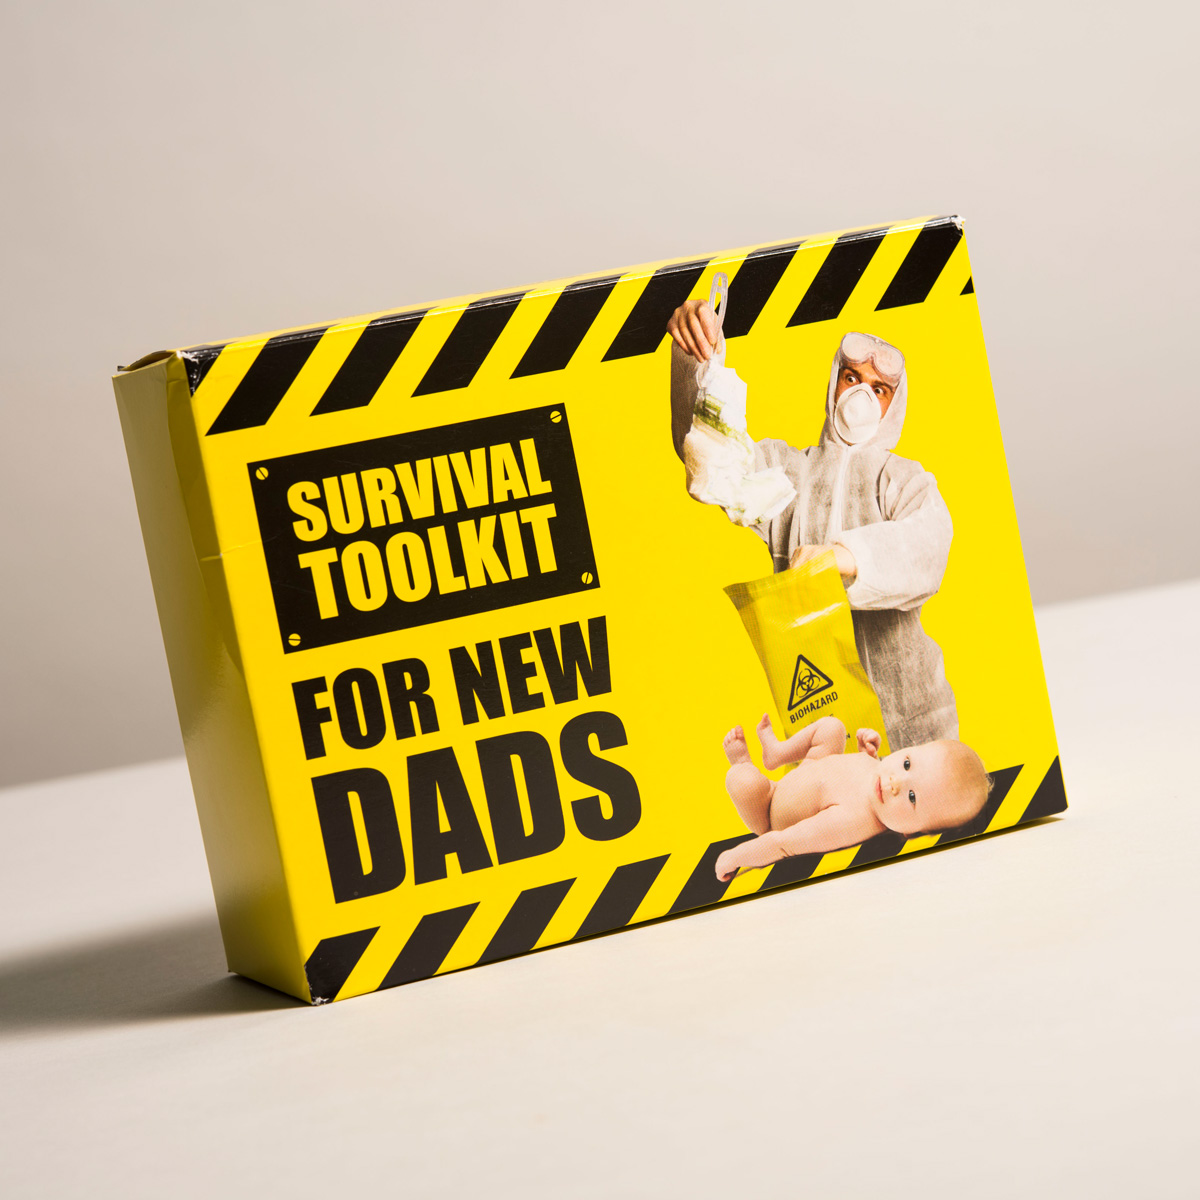 Survival Toolkit For New Dads